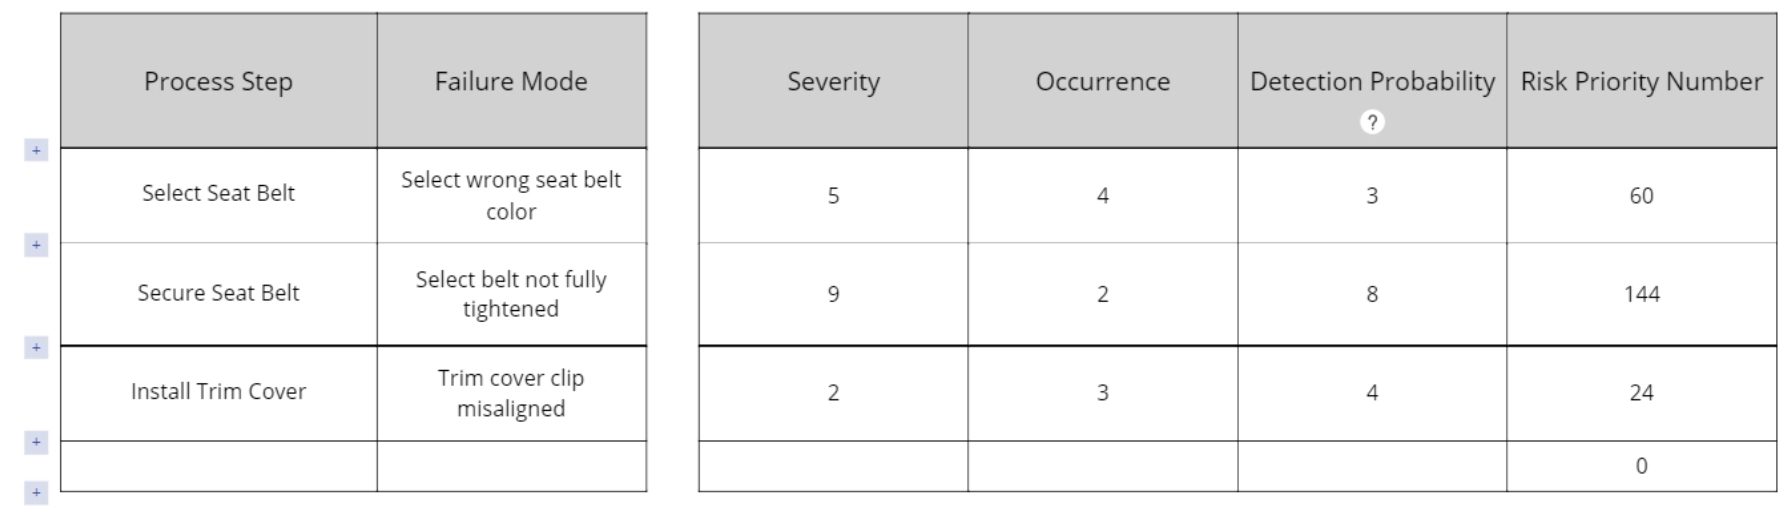 Table showing different FMEA scores.